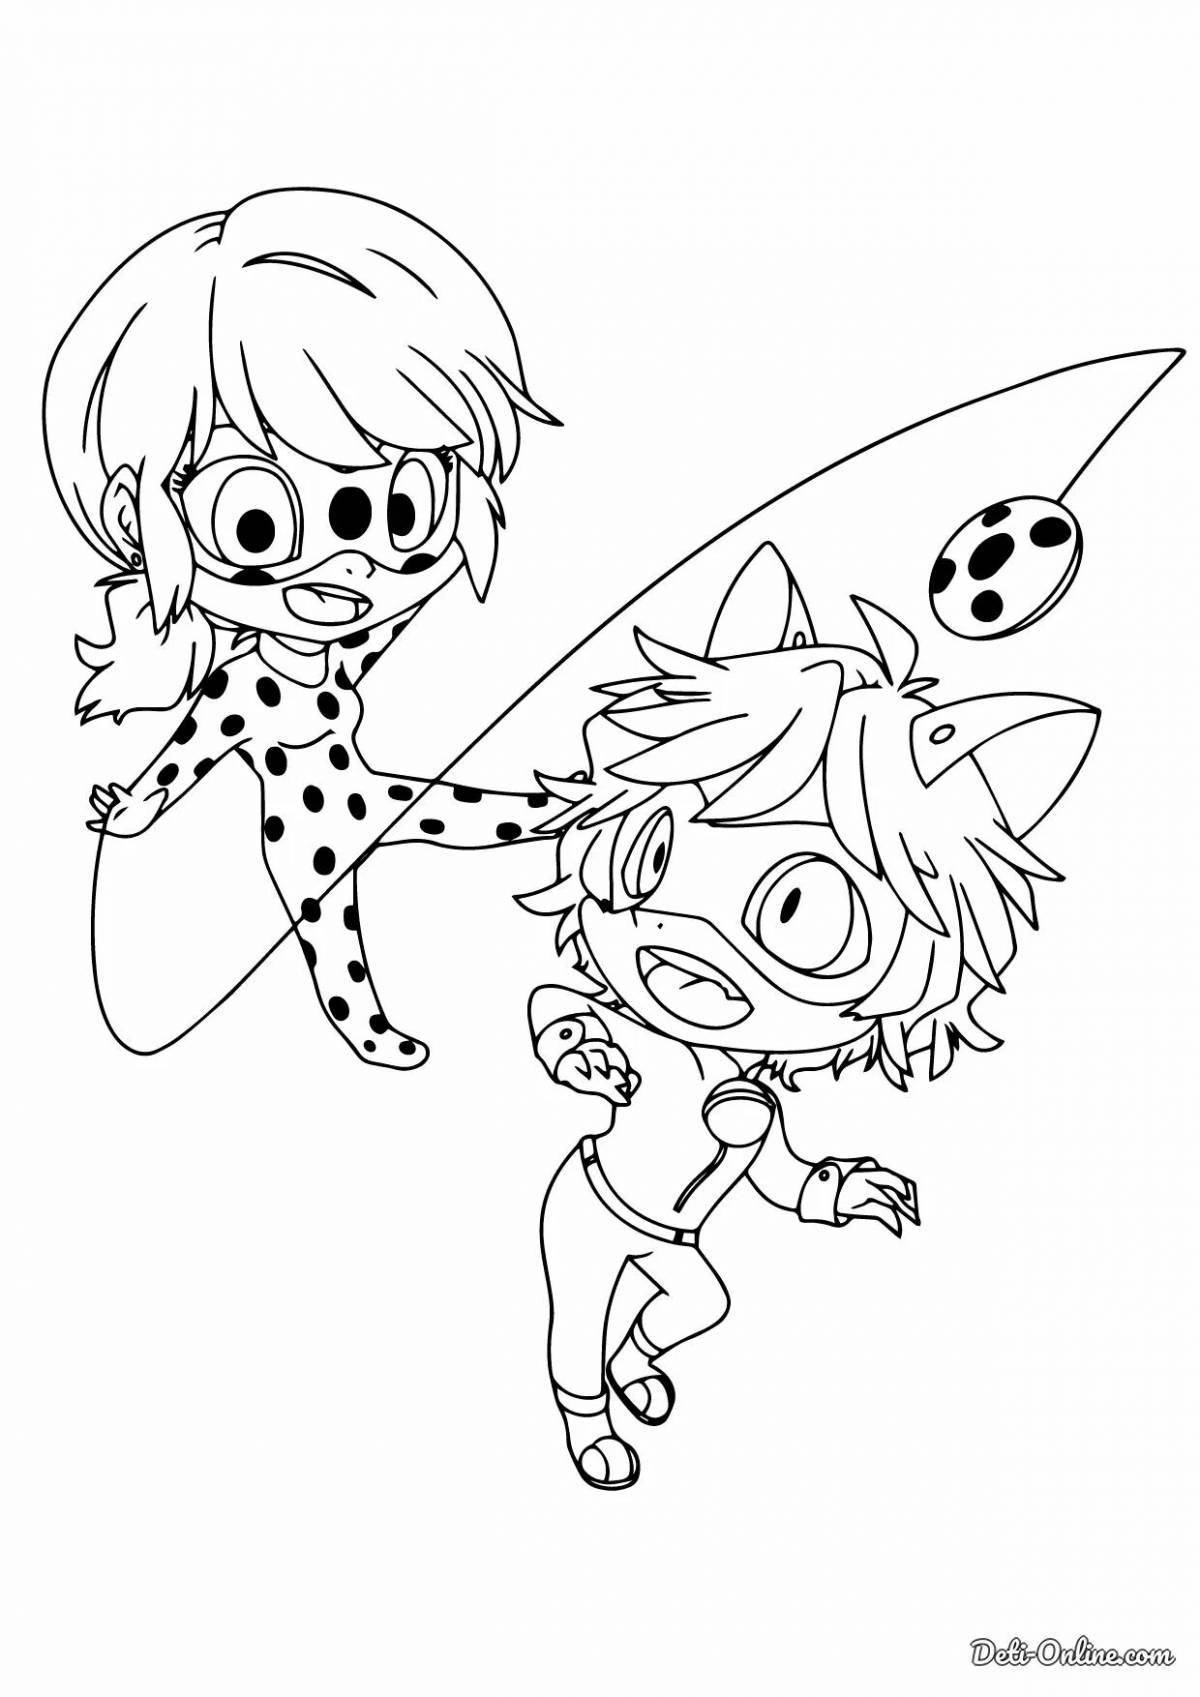 Special ladybug coloring page